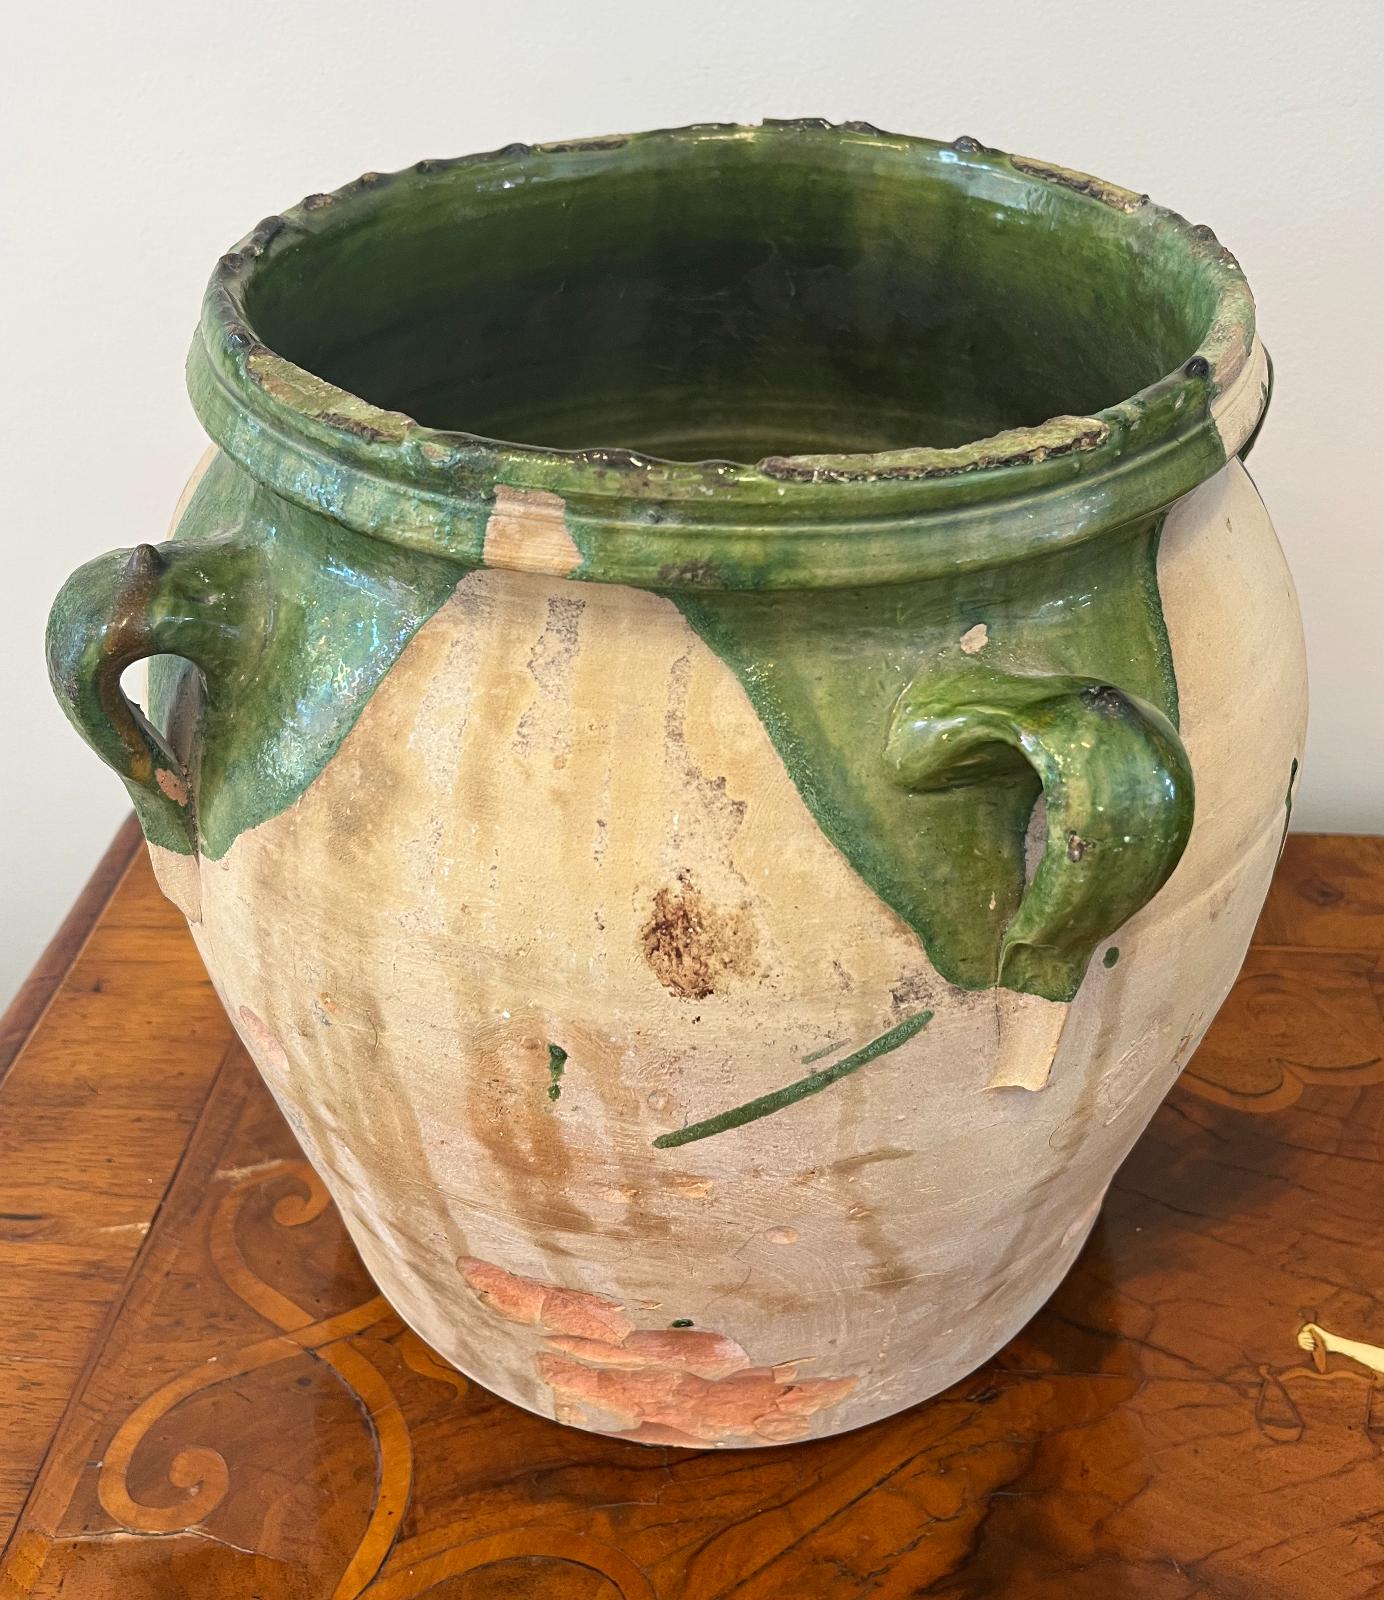 French Provincial Late 19th Century Large Green Glazed Terra Cotta “Confit” Pot with Four Handles